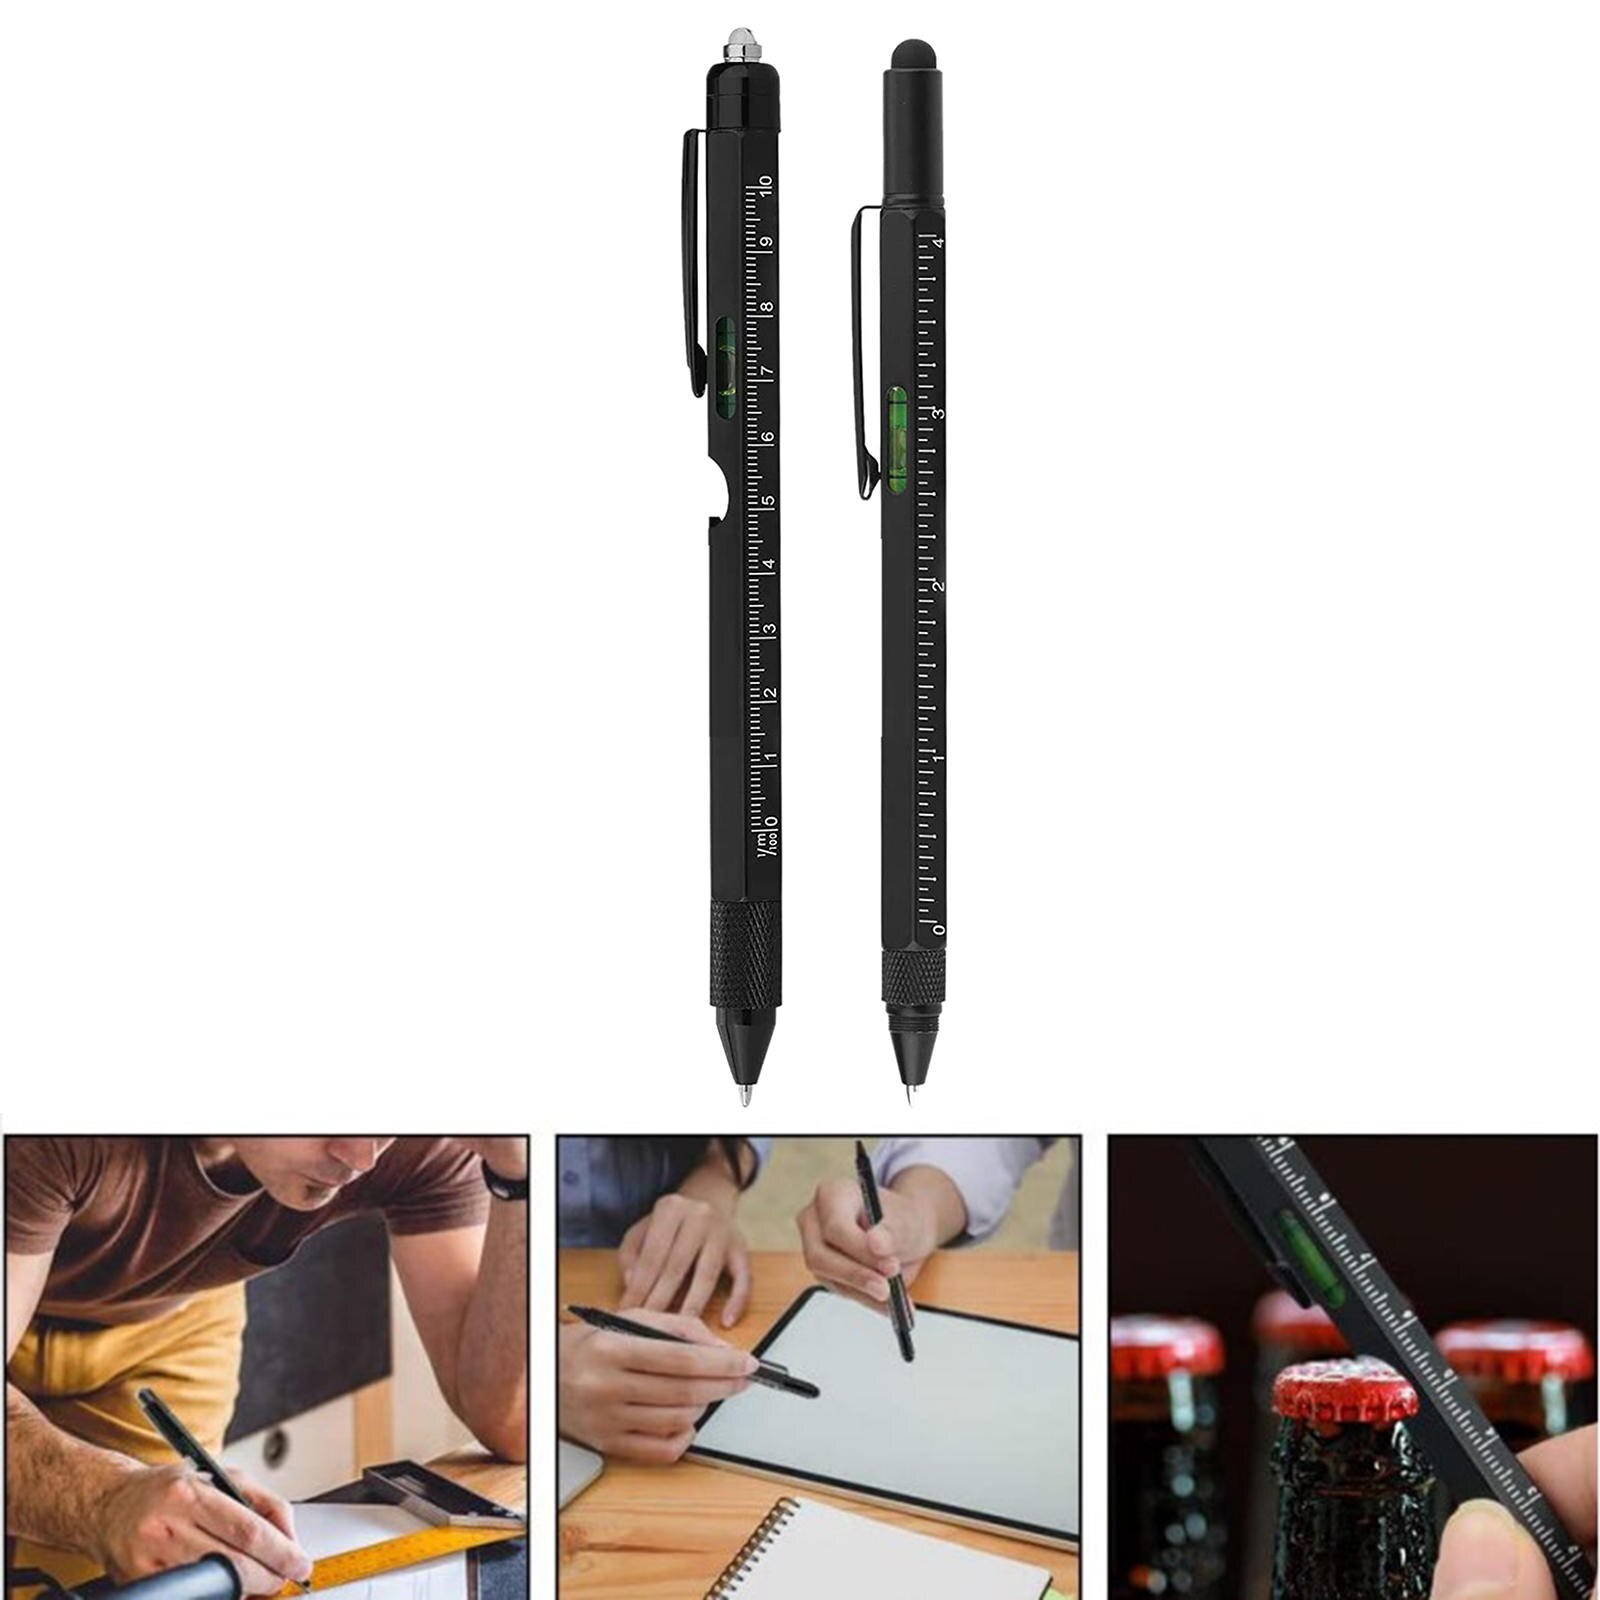 9 in 1 Multifunctional Pen Creative Christmas Gifts for Men Dad Father Boyfriend Husband